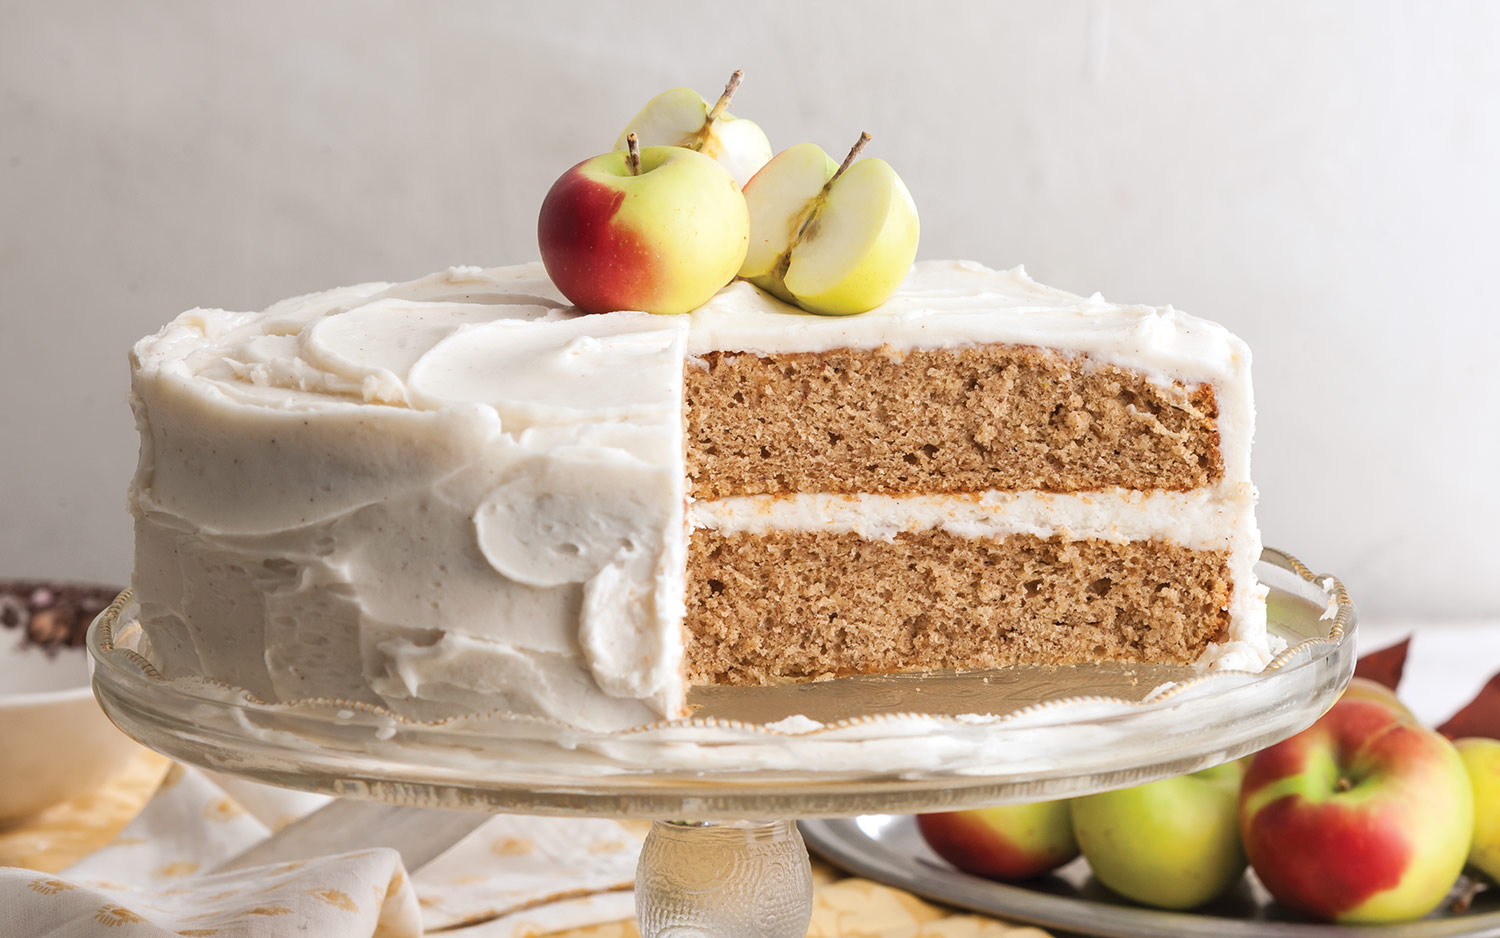 Spiced Applesauce Cake Recipe With Cream Cheese Frosting | Sugar Geek Show